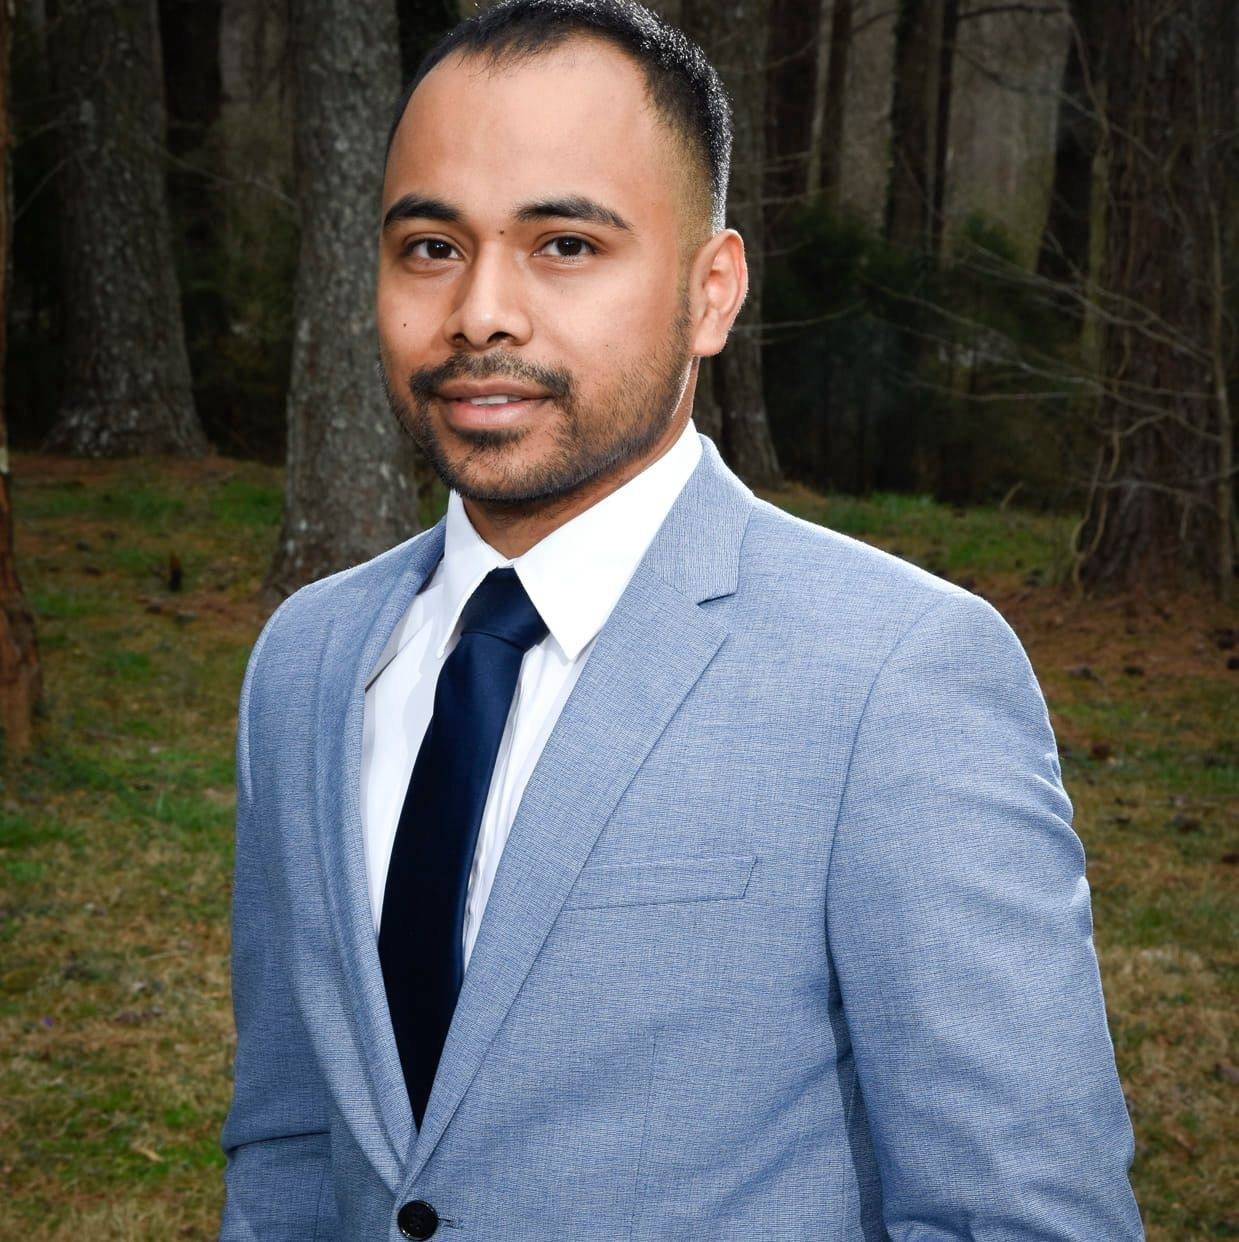 Franklin Gomez Flores is the incumbent Democratic candidate for Dist. 5 on the Chatham County Board of Commissioners